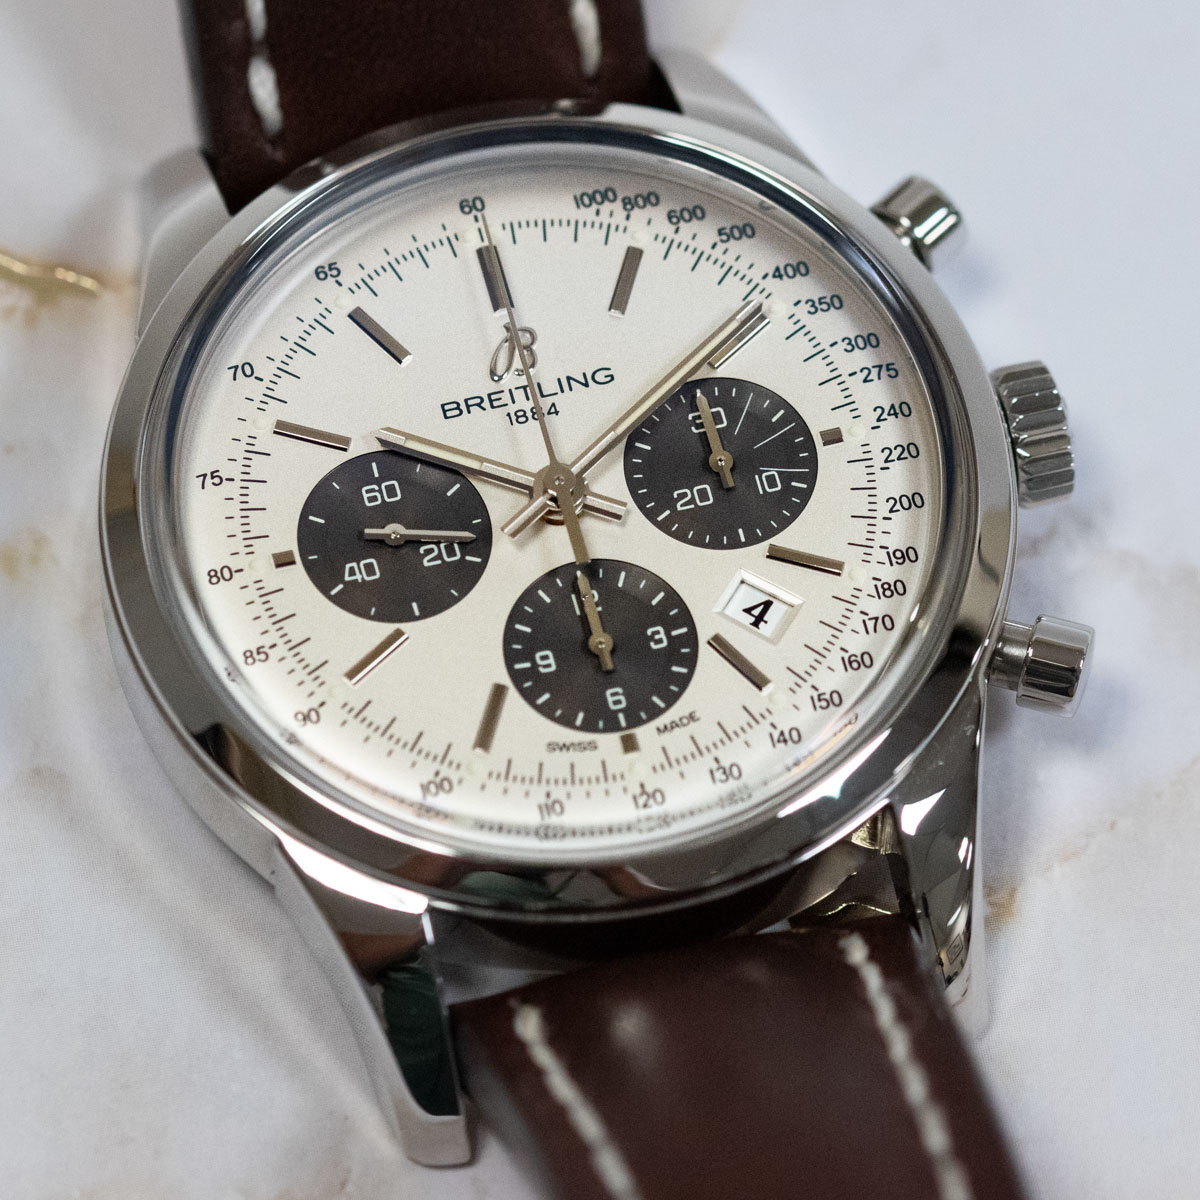 Breitling : TransOcean Chronograph : AB015212/G724 : Steel for Rs